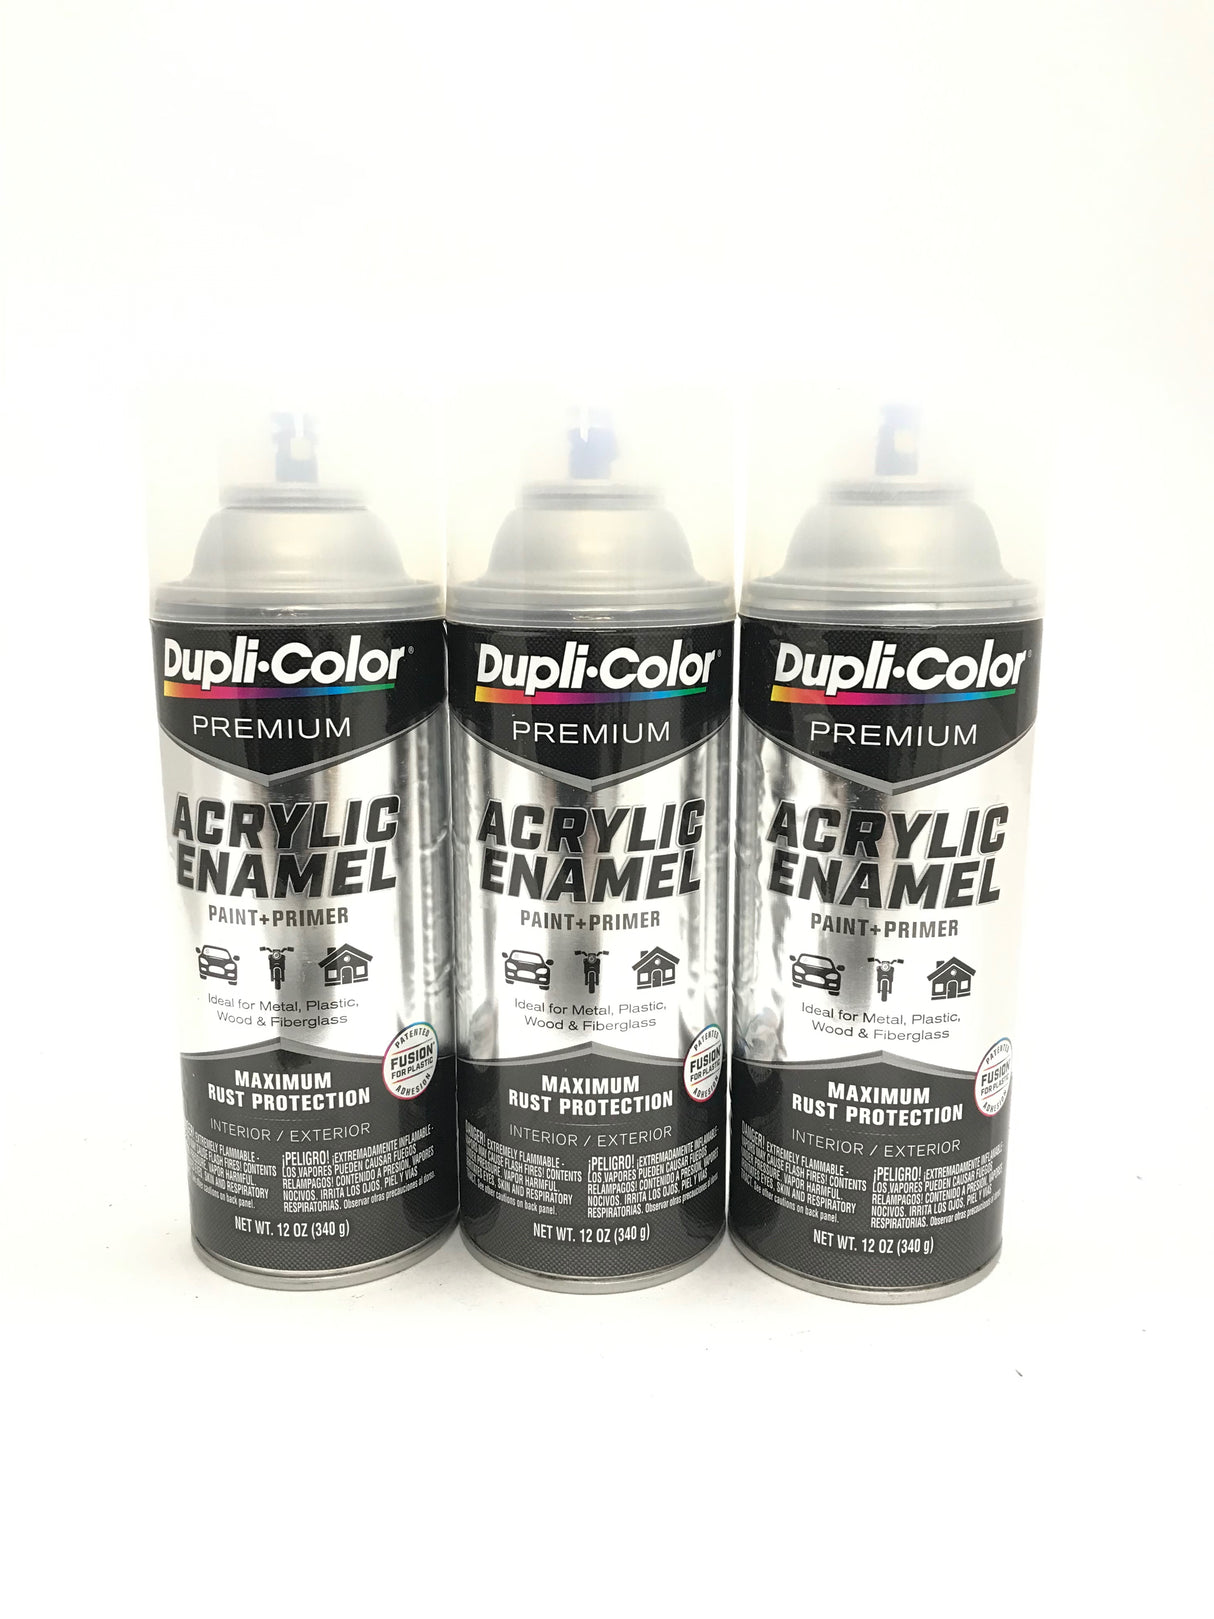 Duplicolor PAE114-3 PACK CRYSTAL CLEAR Premium Acrylic Enamel - Rust Protection - 12 OZ